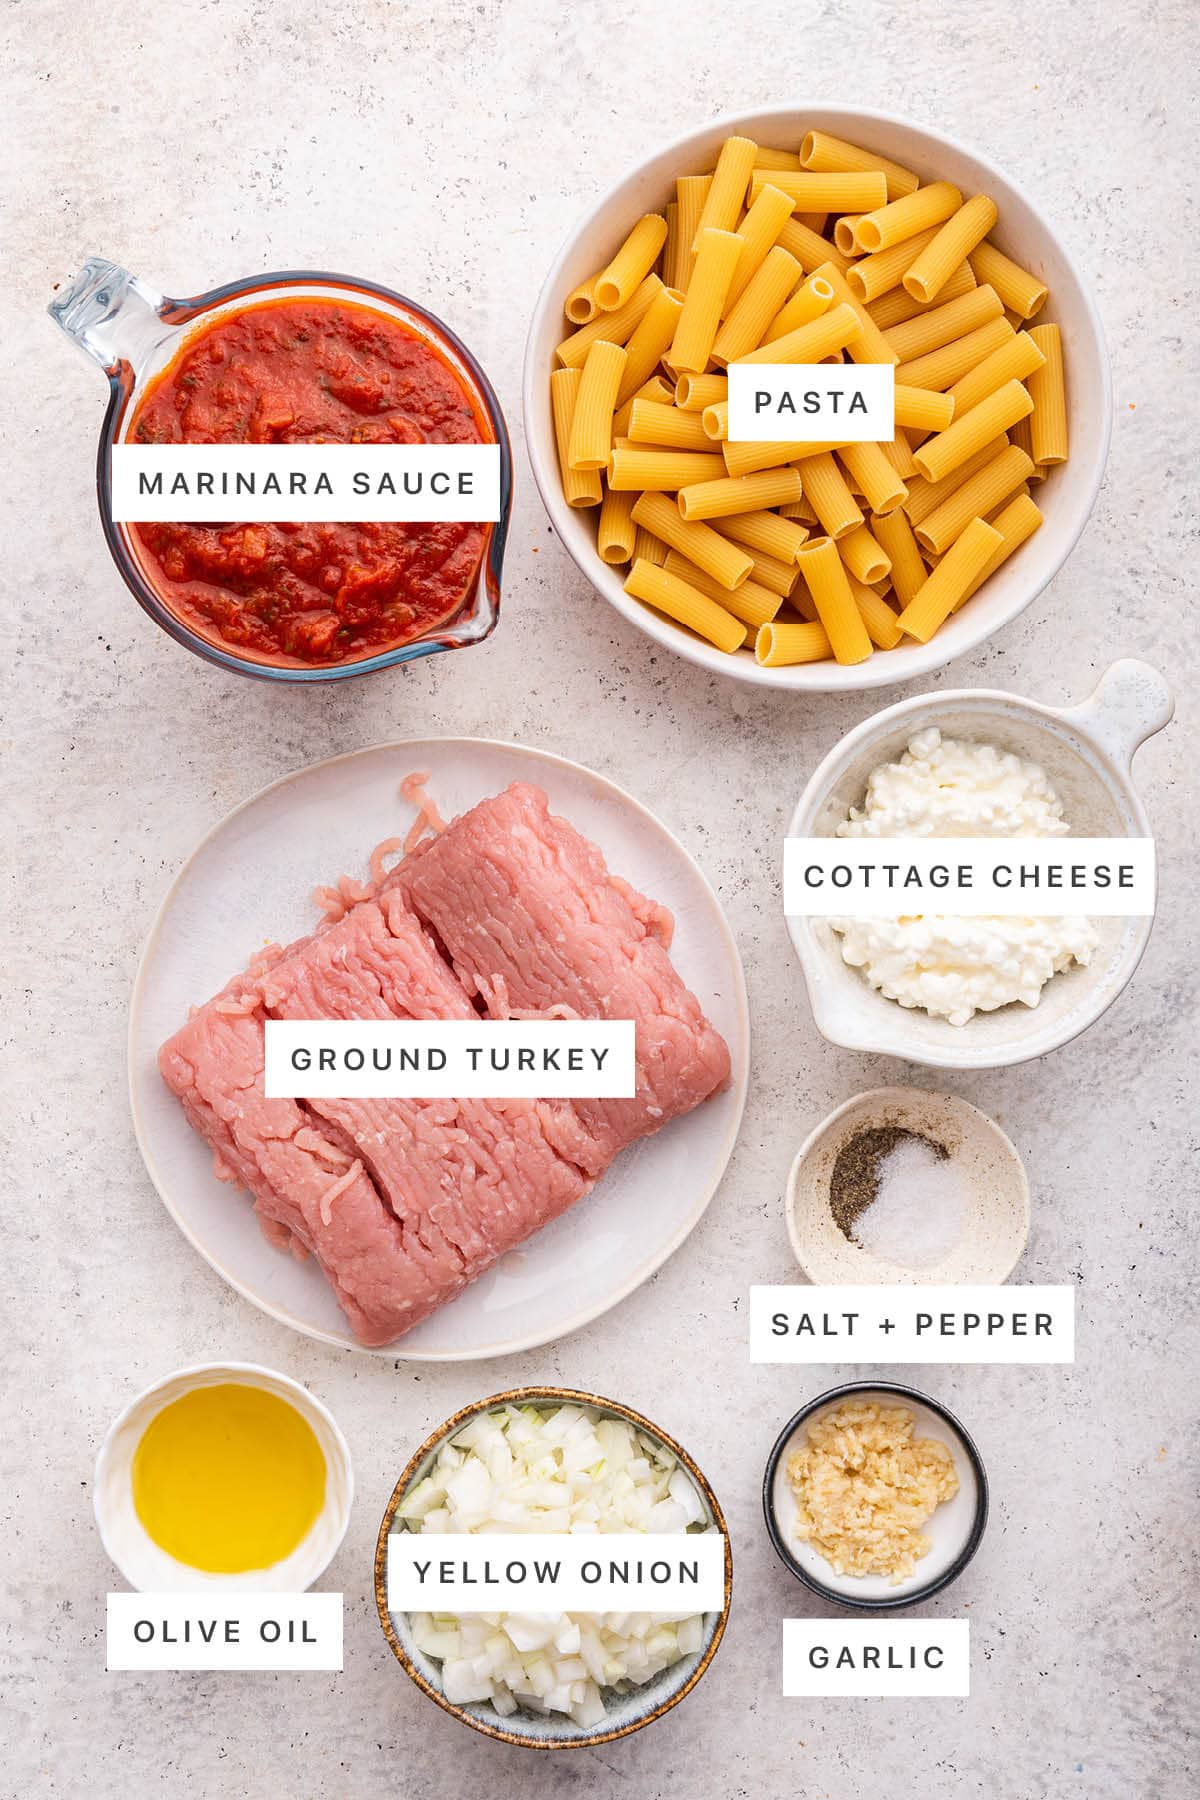 Ingredients measured out to make Creamy Cottage Cheese Pasta: marinara sauce, pasta, ground turkey, cottage cheese, salt, pepper, olive oil, yellow onion and garlic.